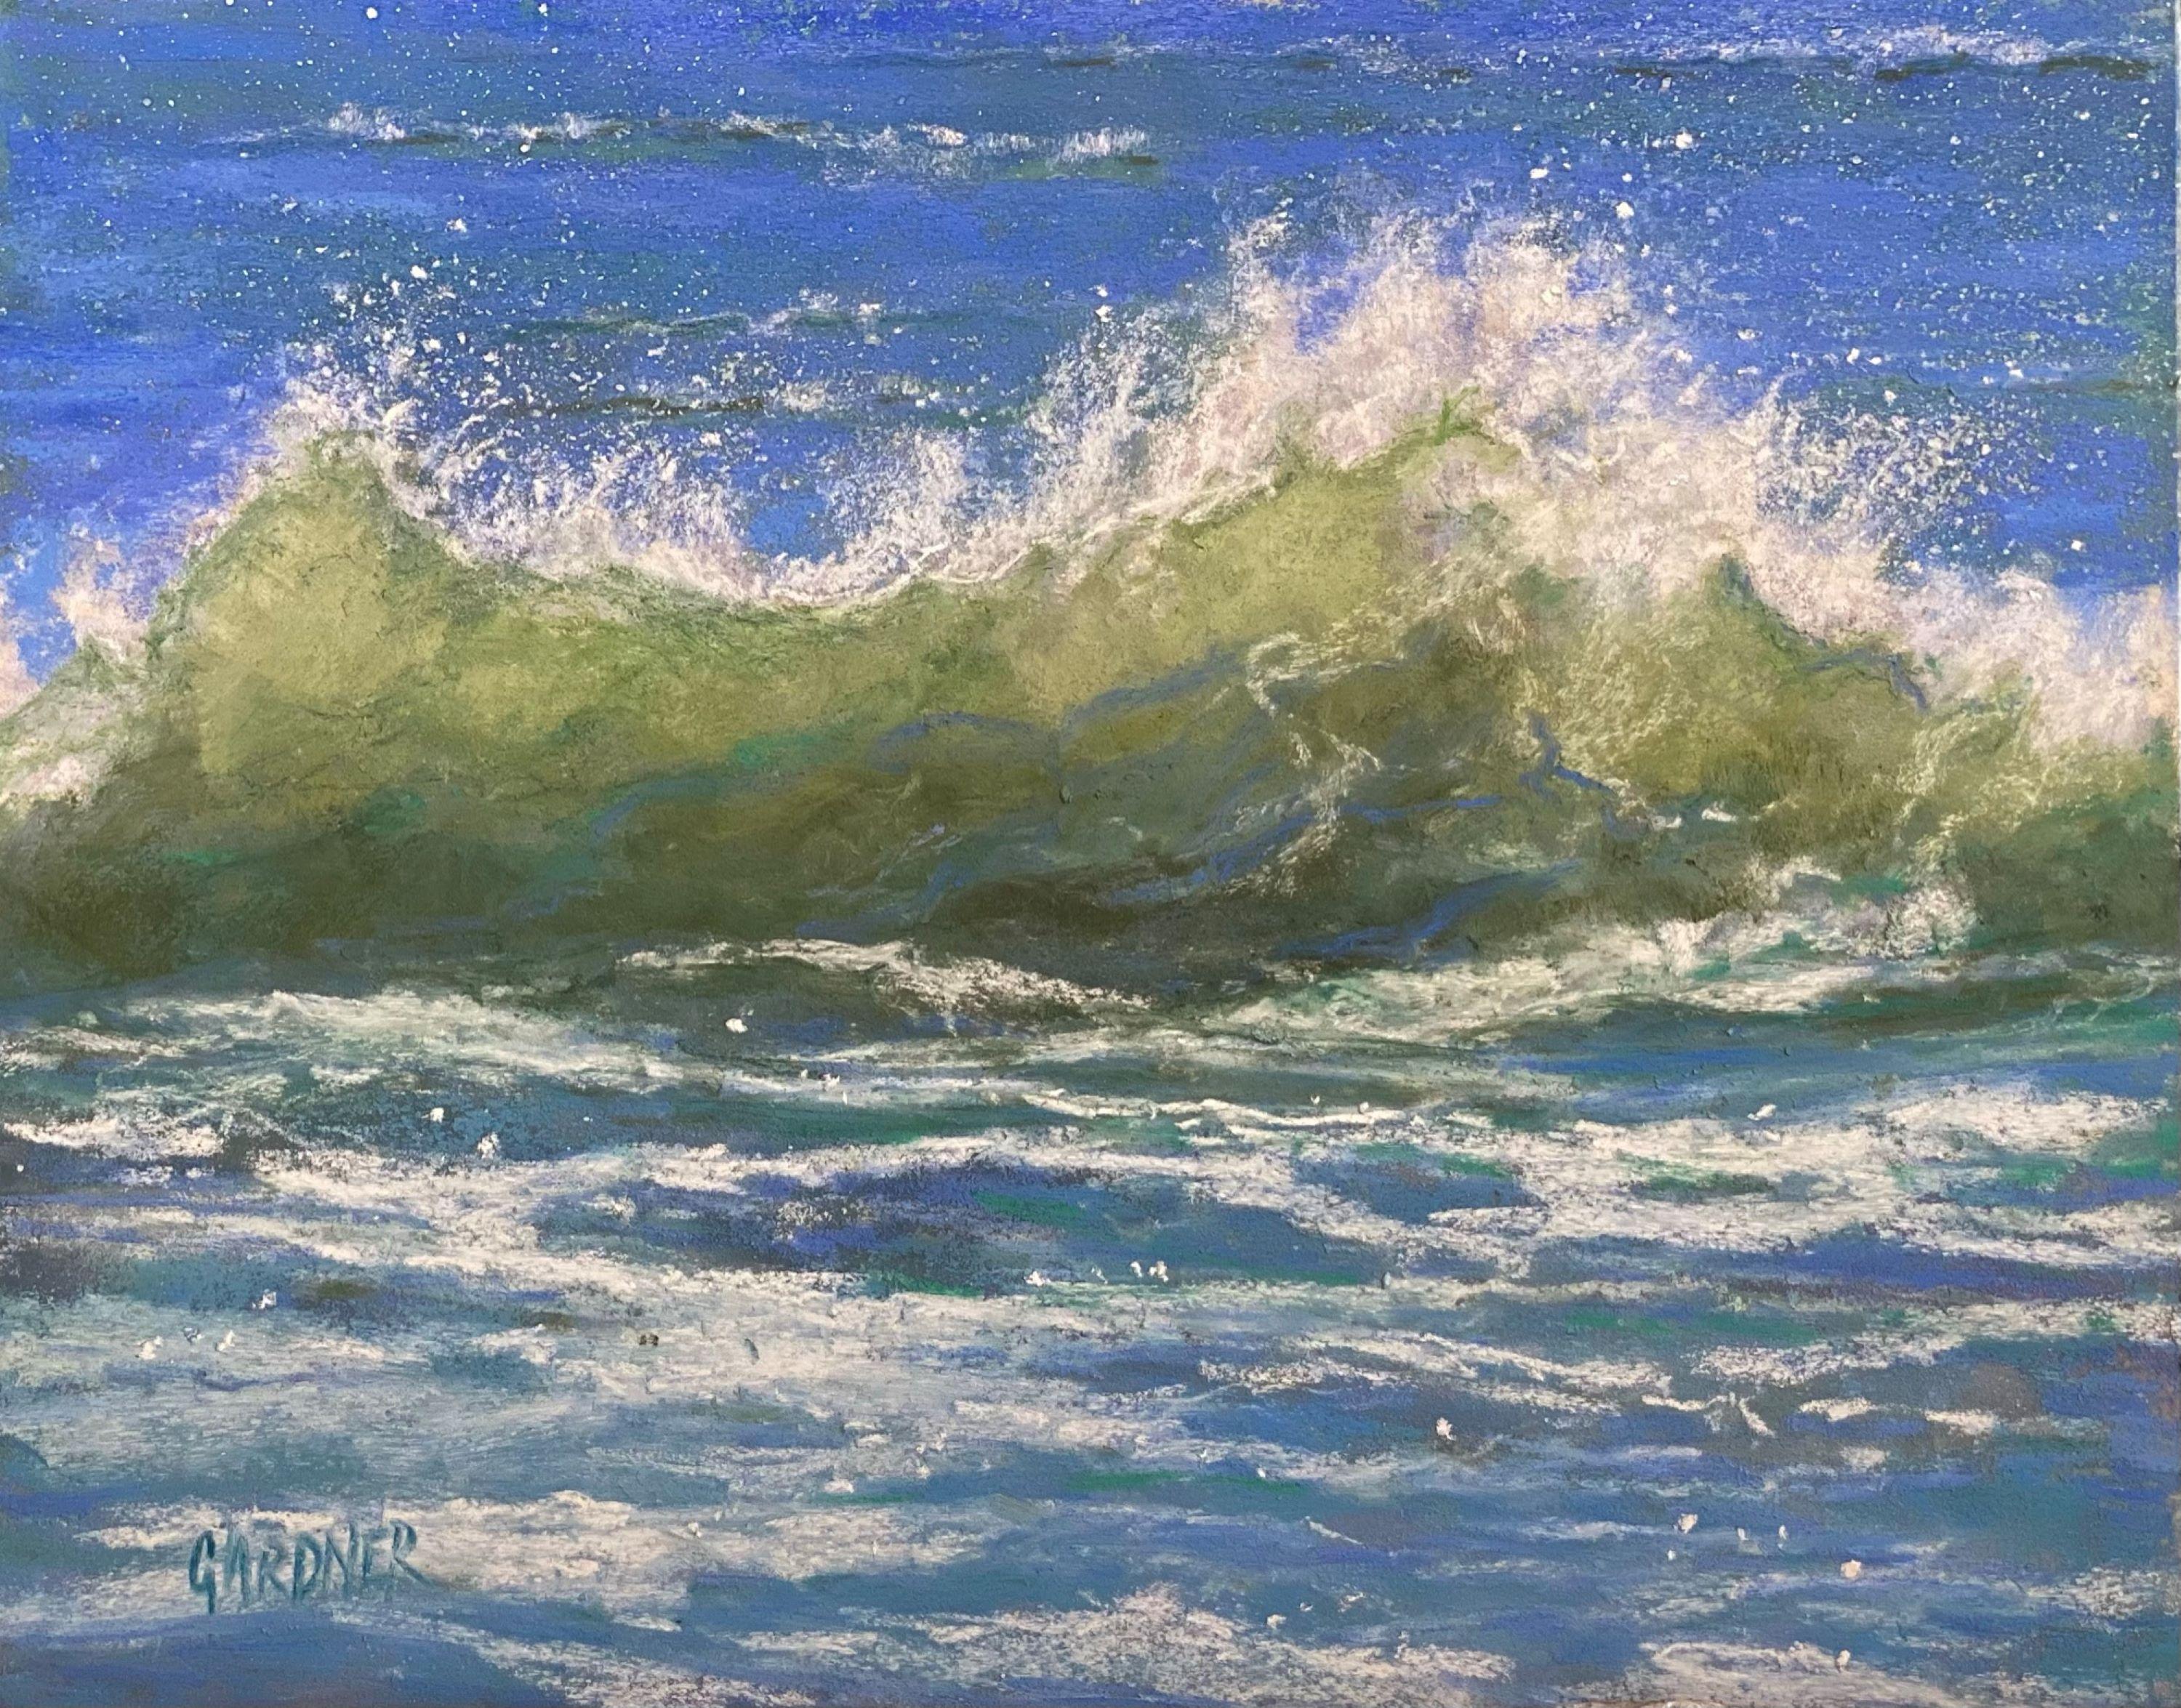 Dina Gardner Landscape Painting - Twist and Shout 1, Original Seascape Painting in Pastel on Board, 2021